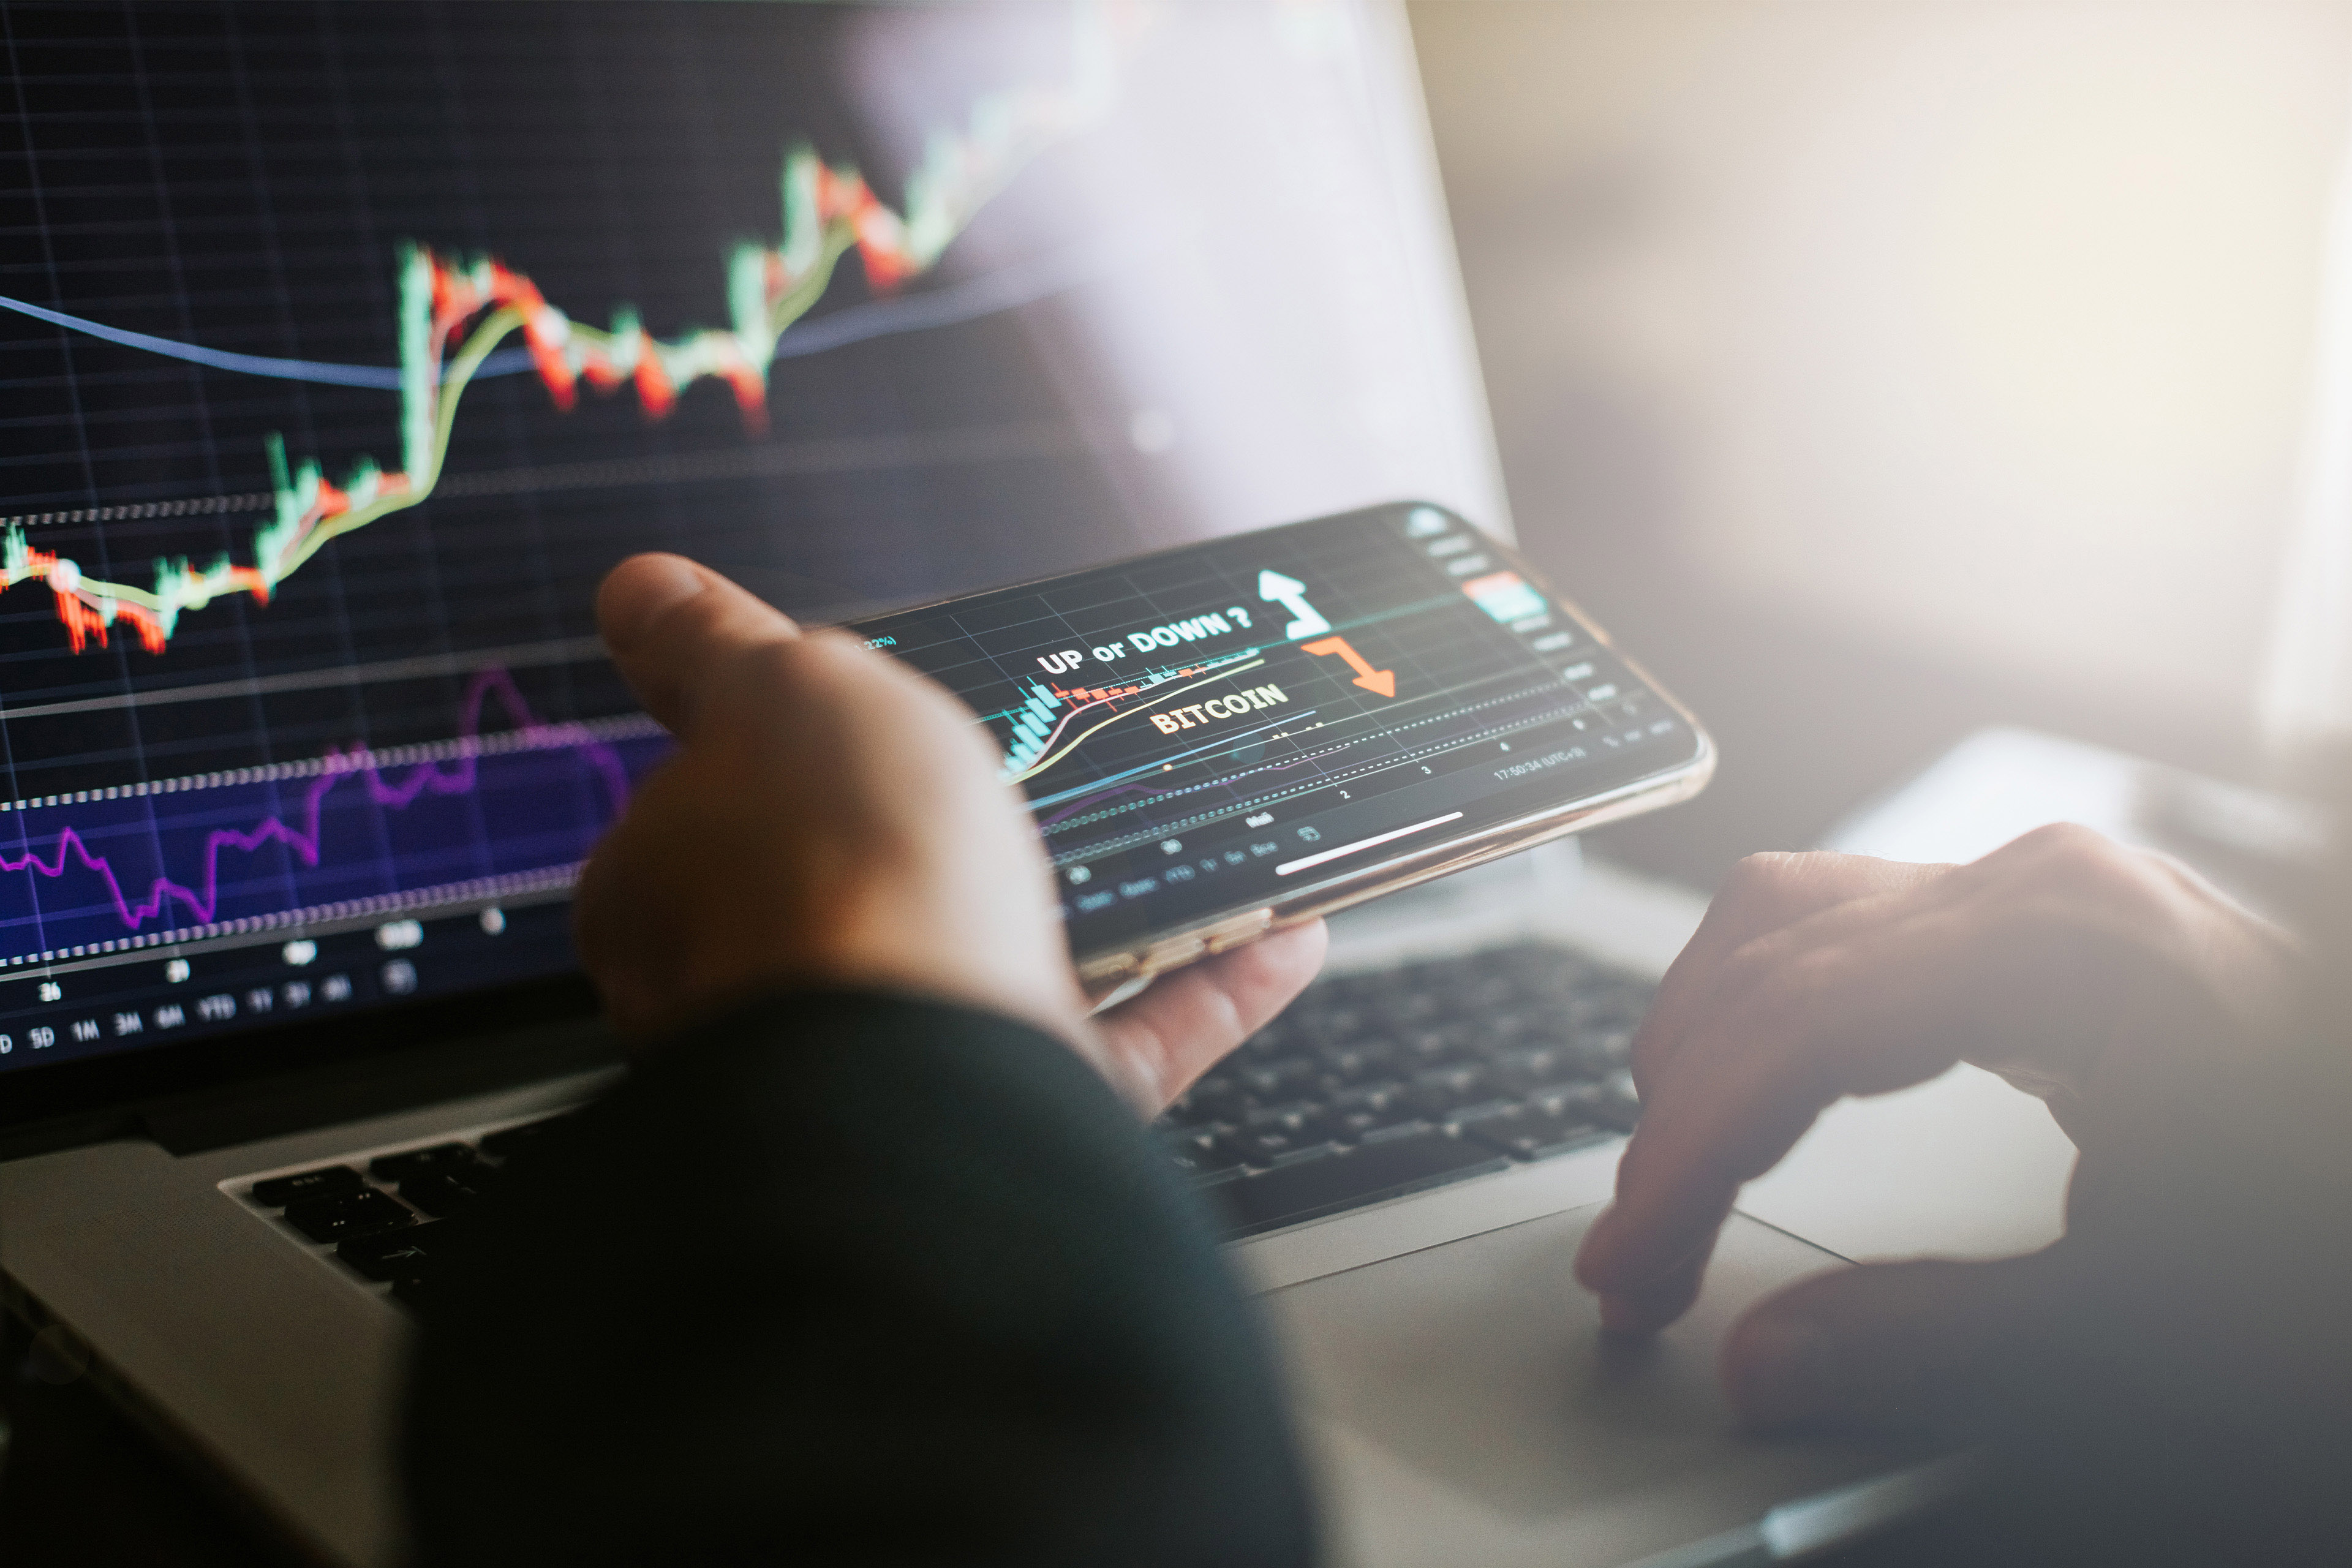 5 indicators to monitor before investing in crypto during a down market.